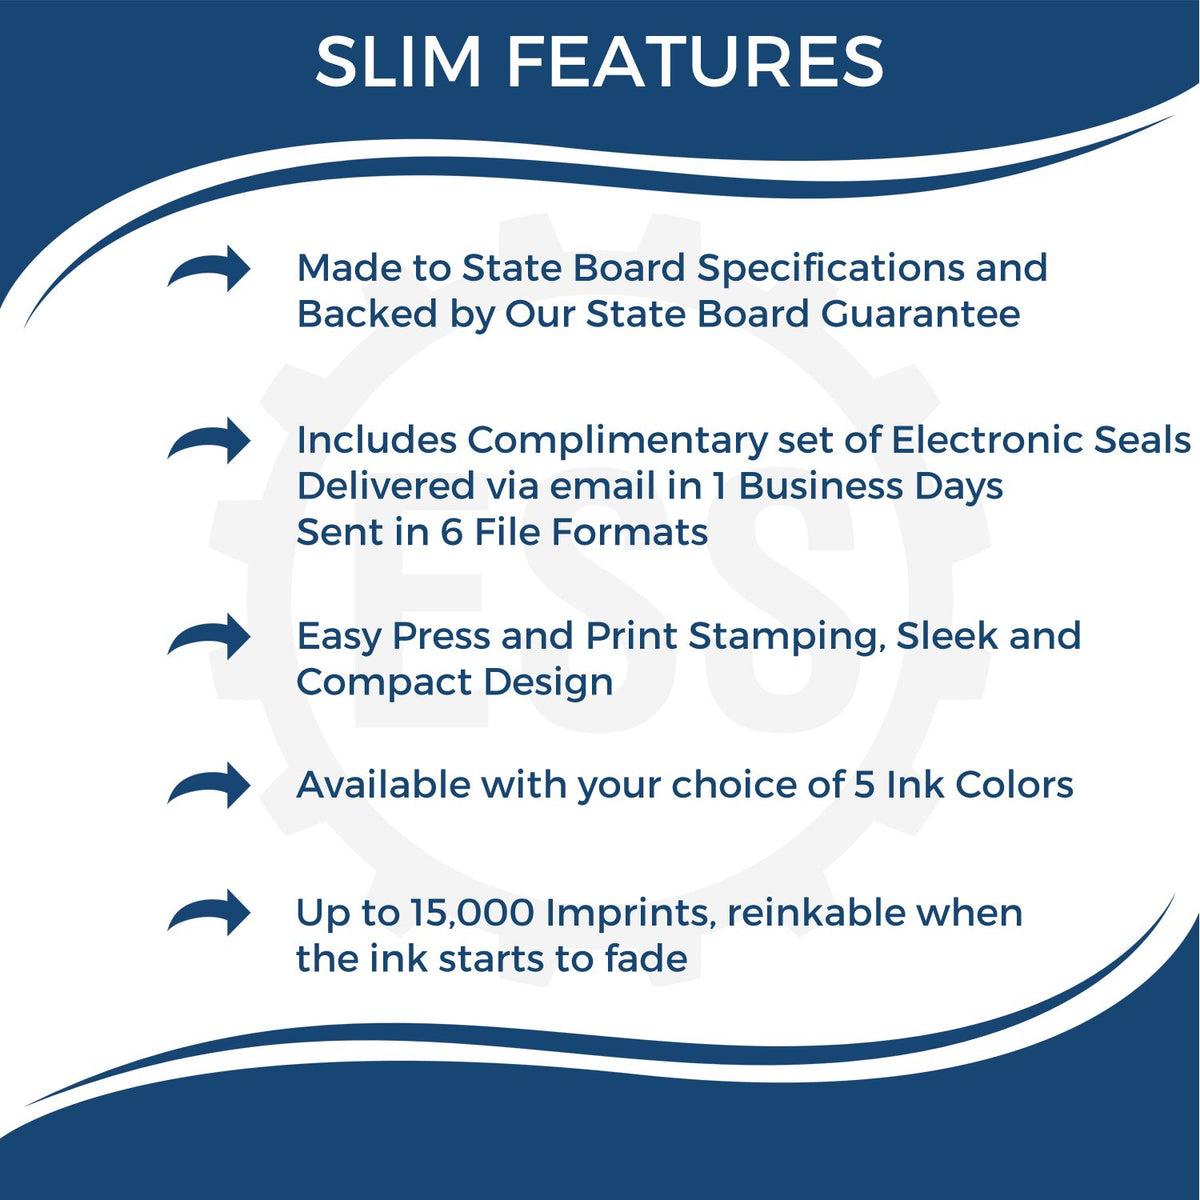 A picture of an infographic highlighting the selling points for the Slim Pre-Inked Oklahoma Architect Seal Stamp